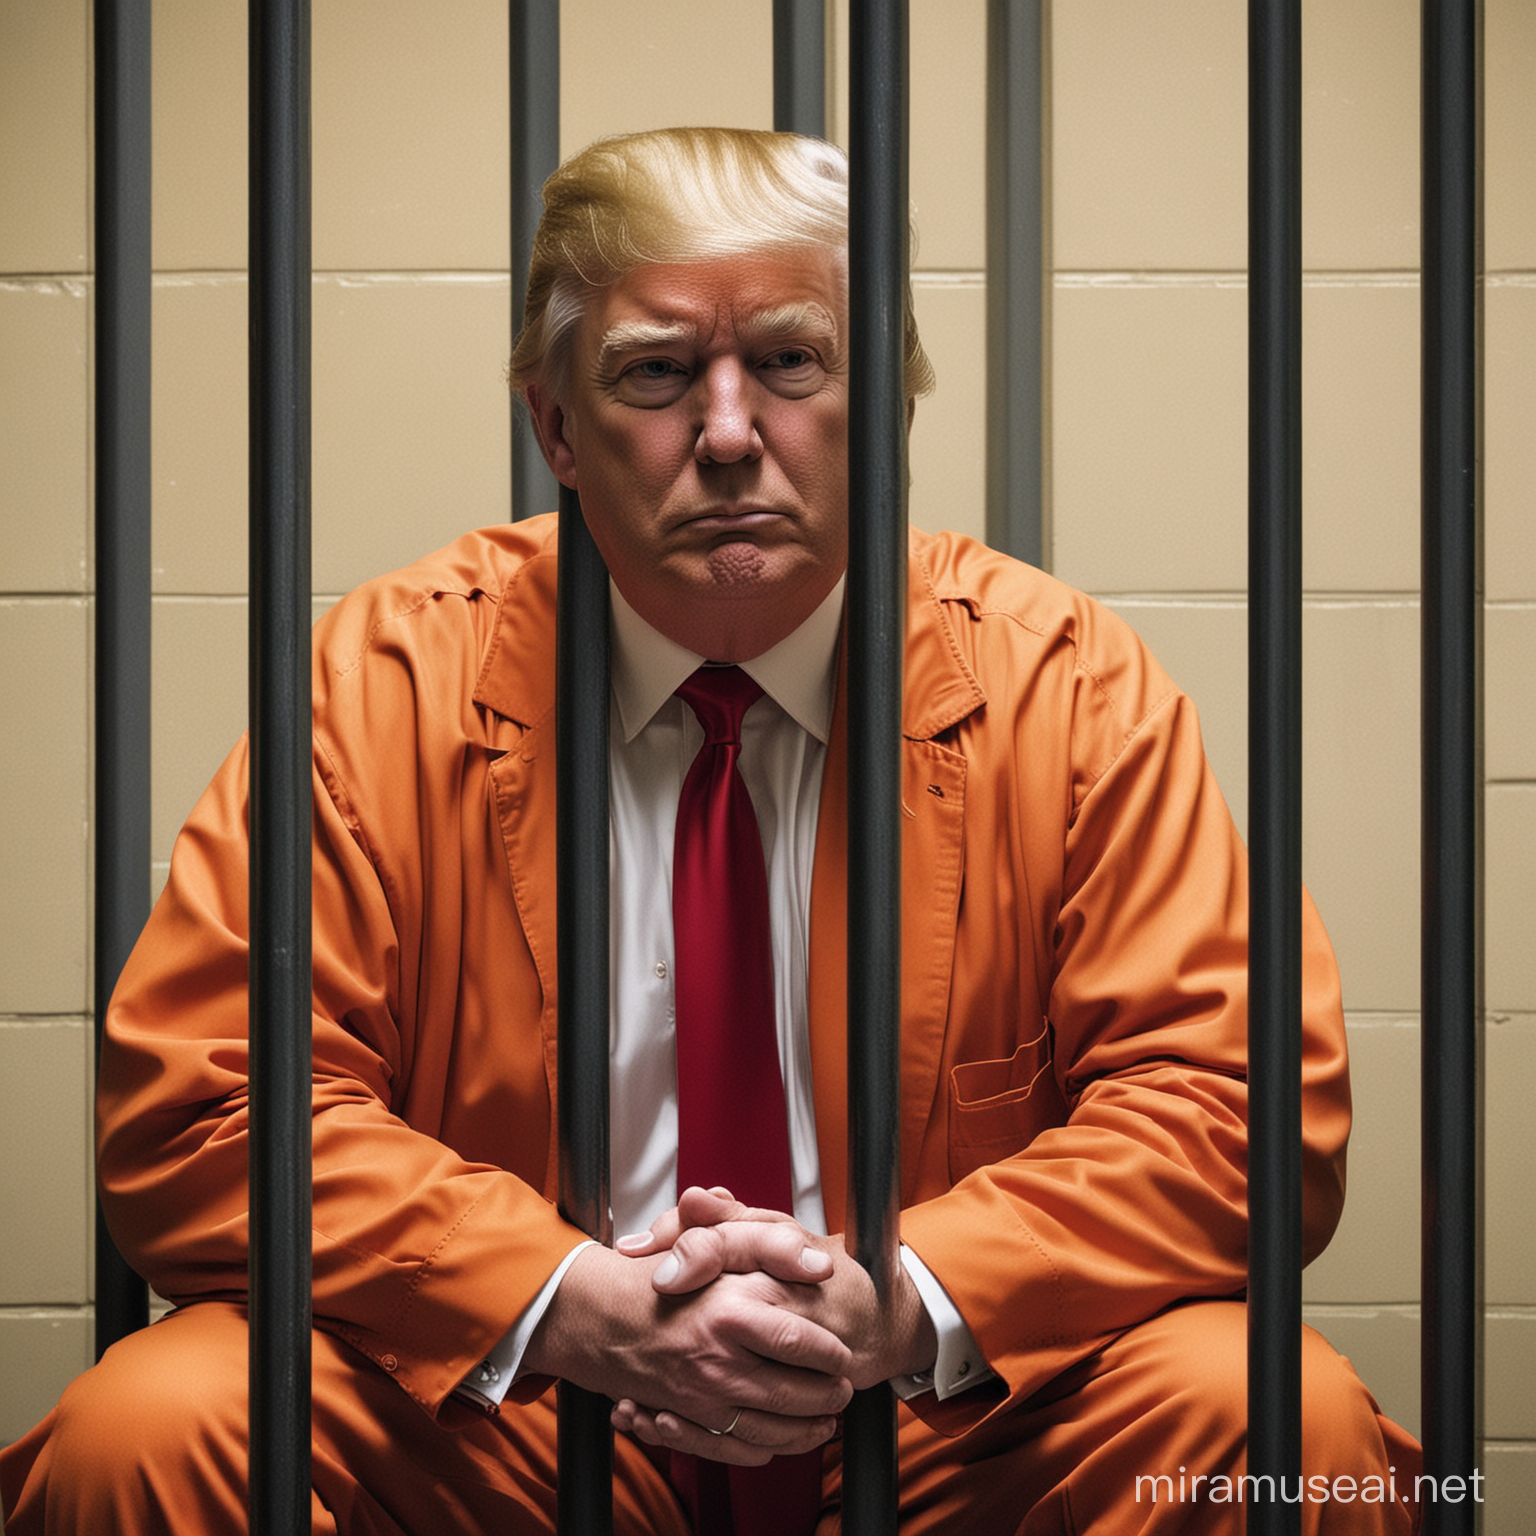 Former President Donald Trump Contemplating in Prison Cell